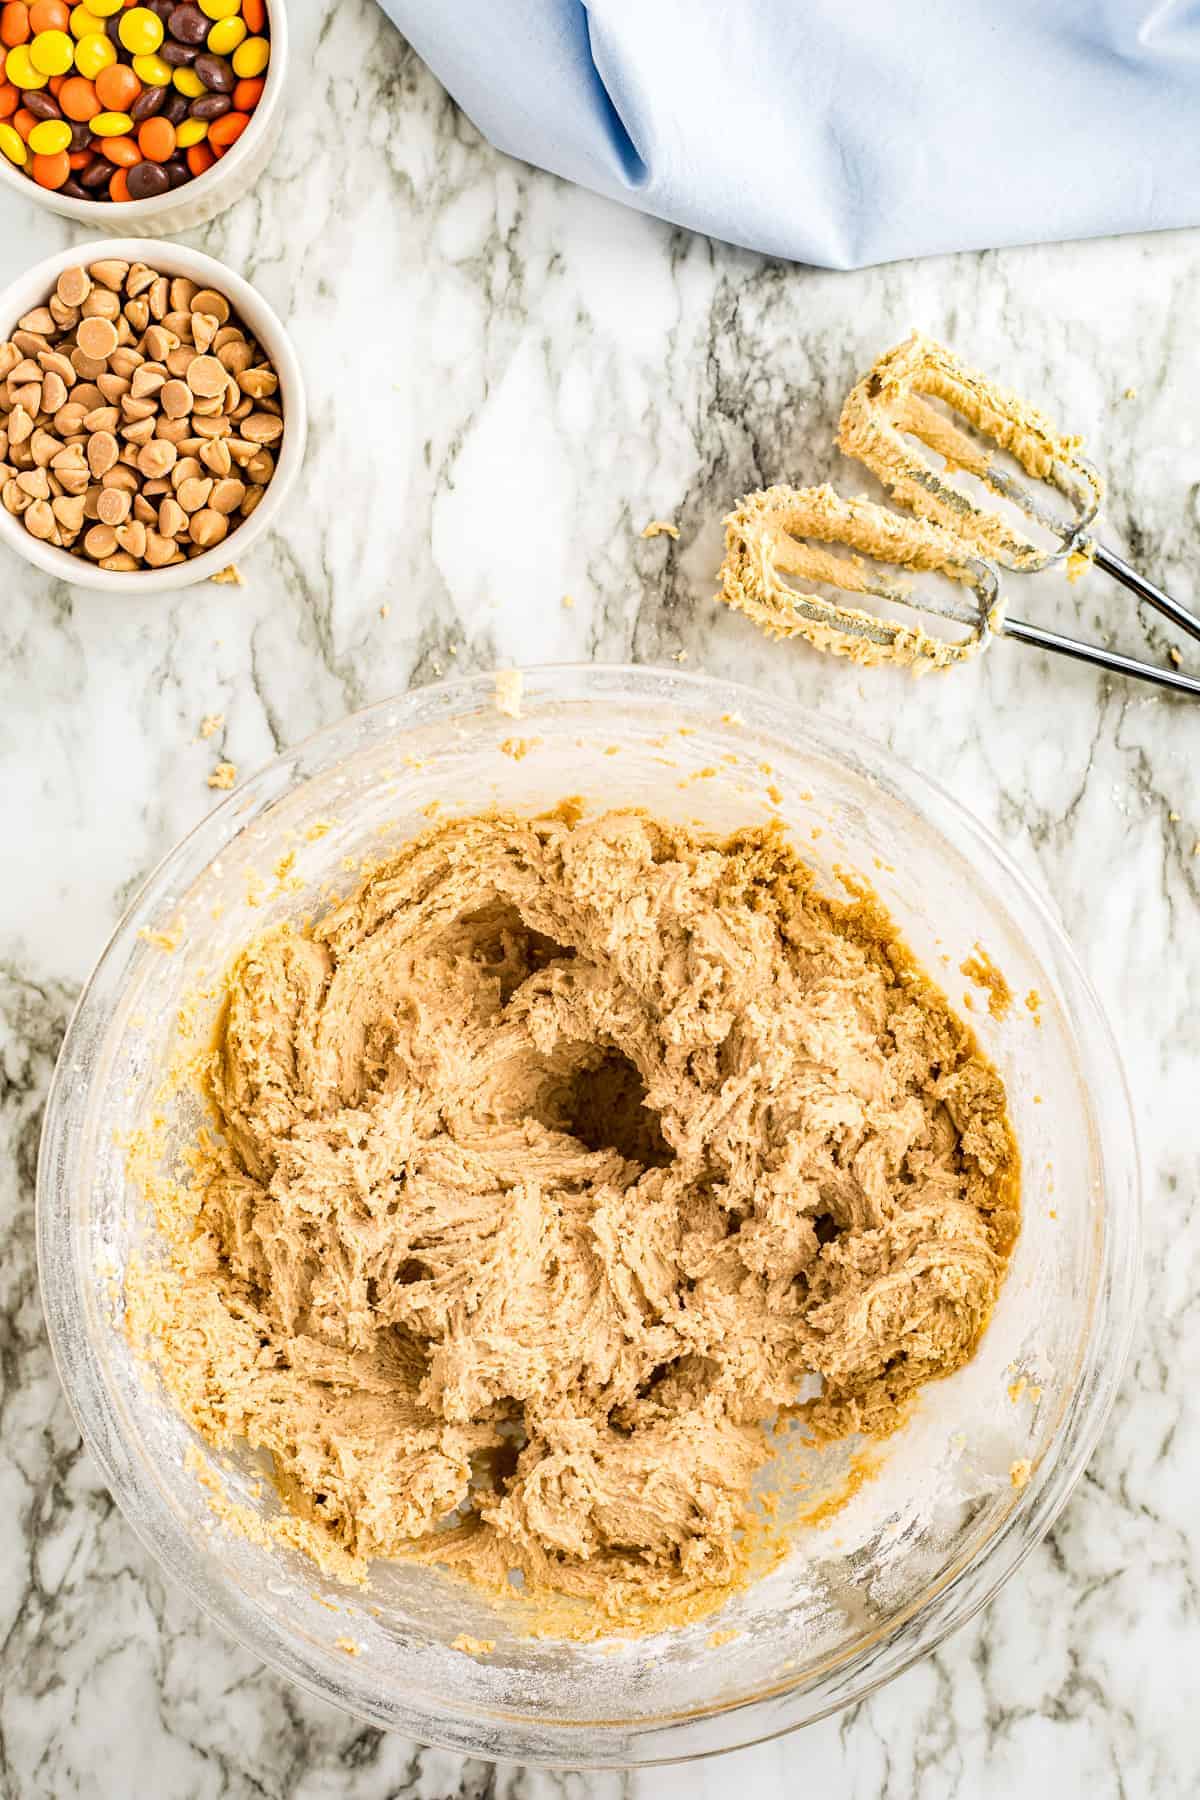 Mixed Peanut Butter Cookie Dough in glass bowl